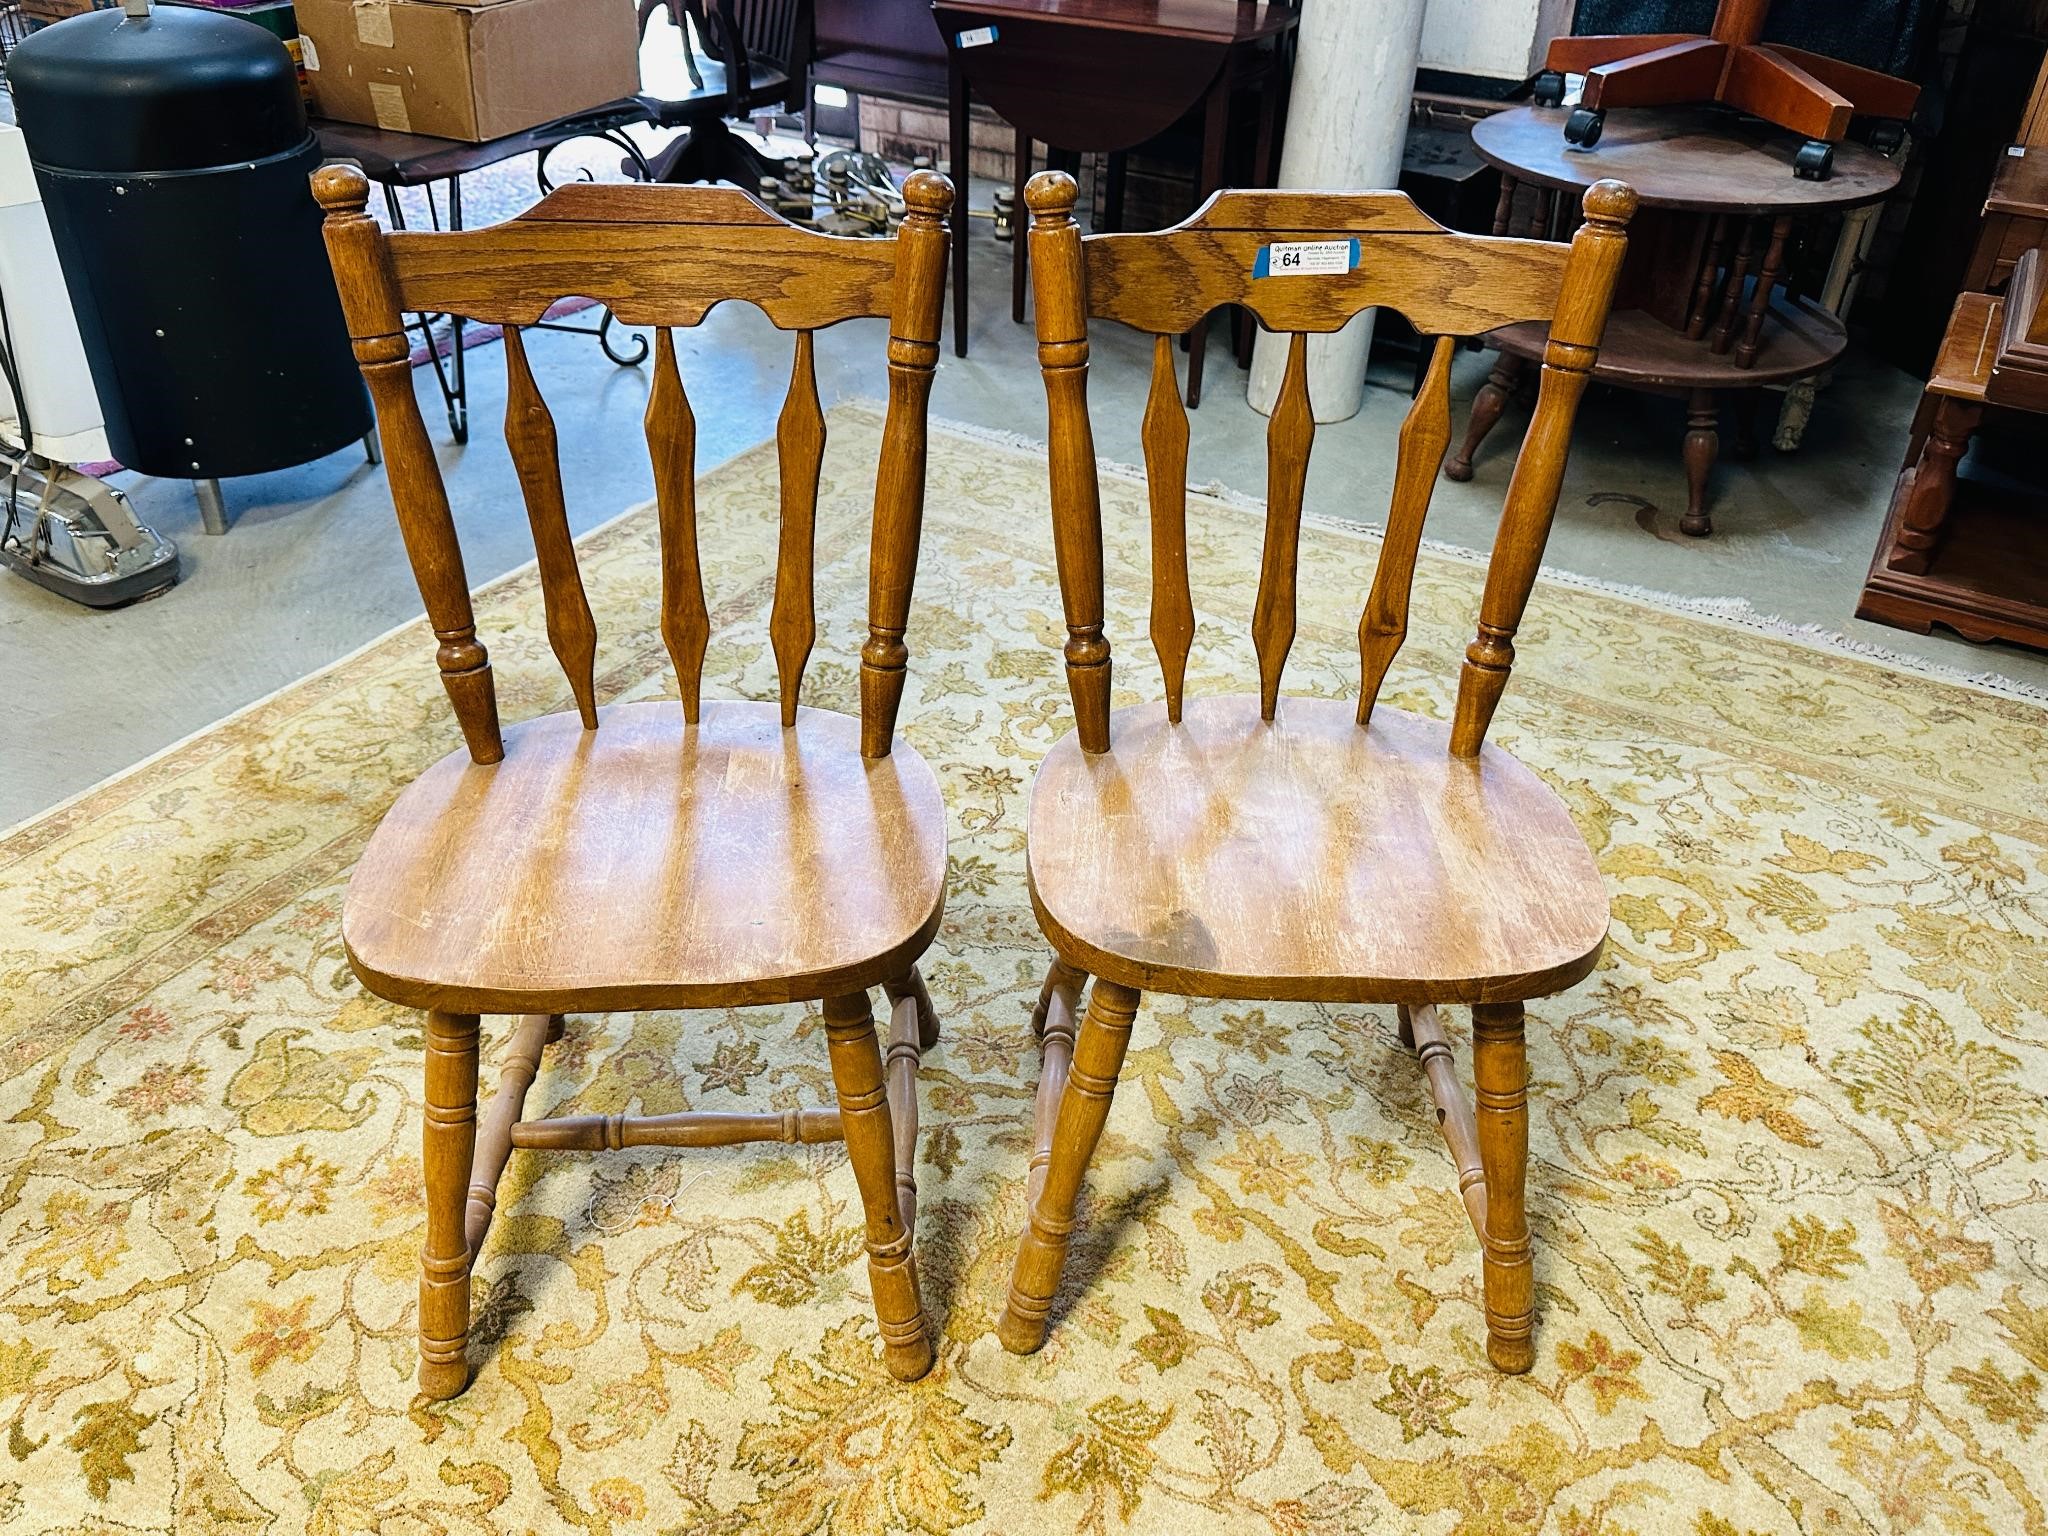 (2) Vintage Wooden Chairs